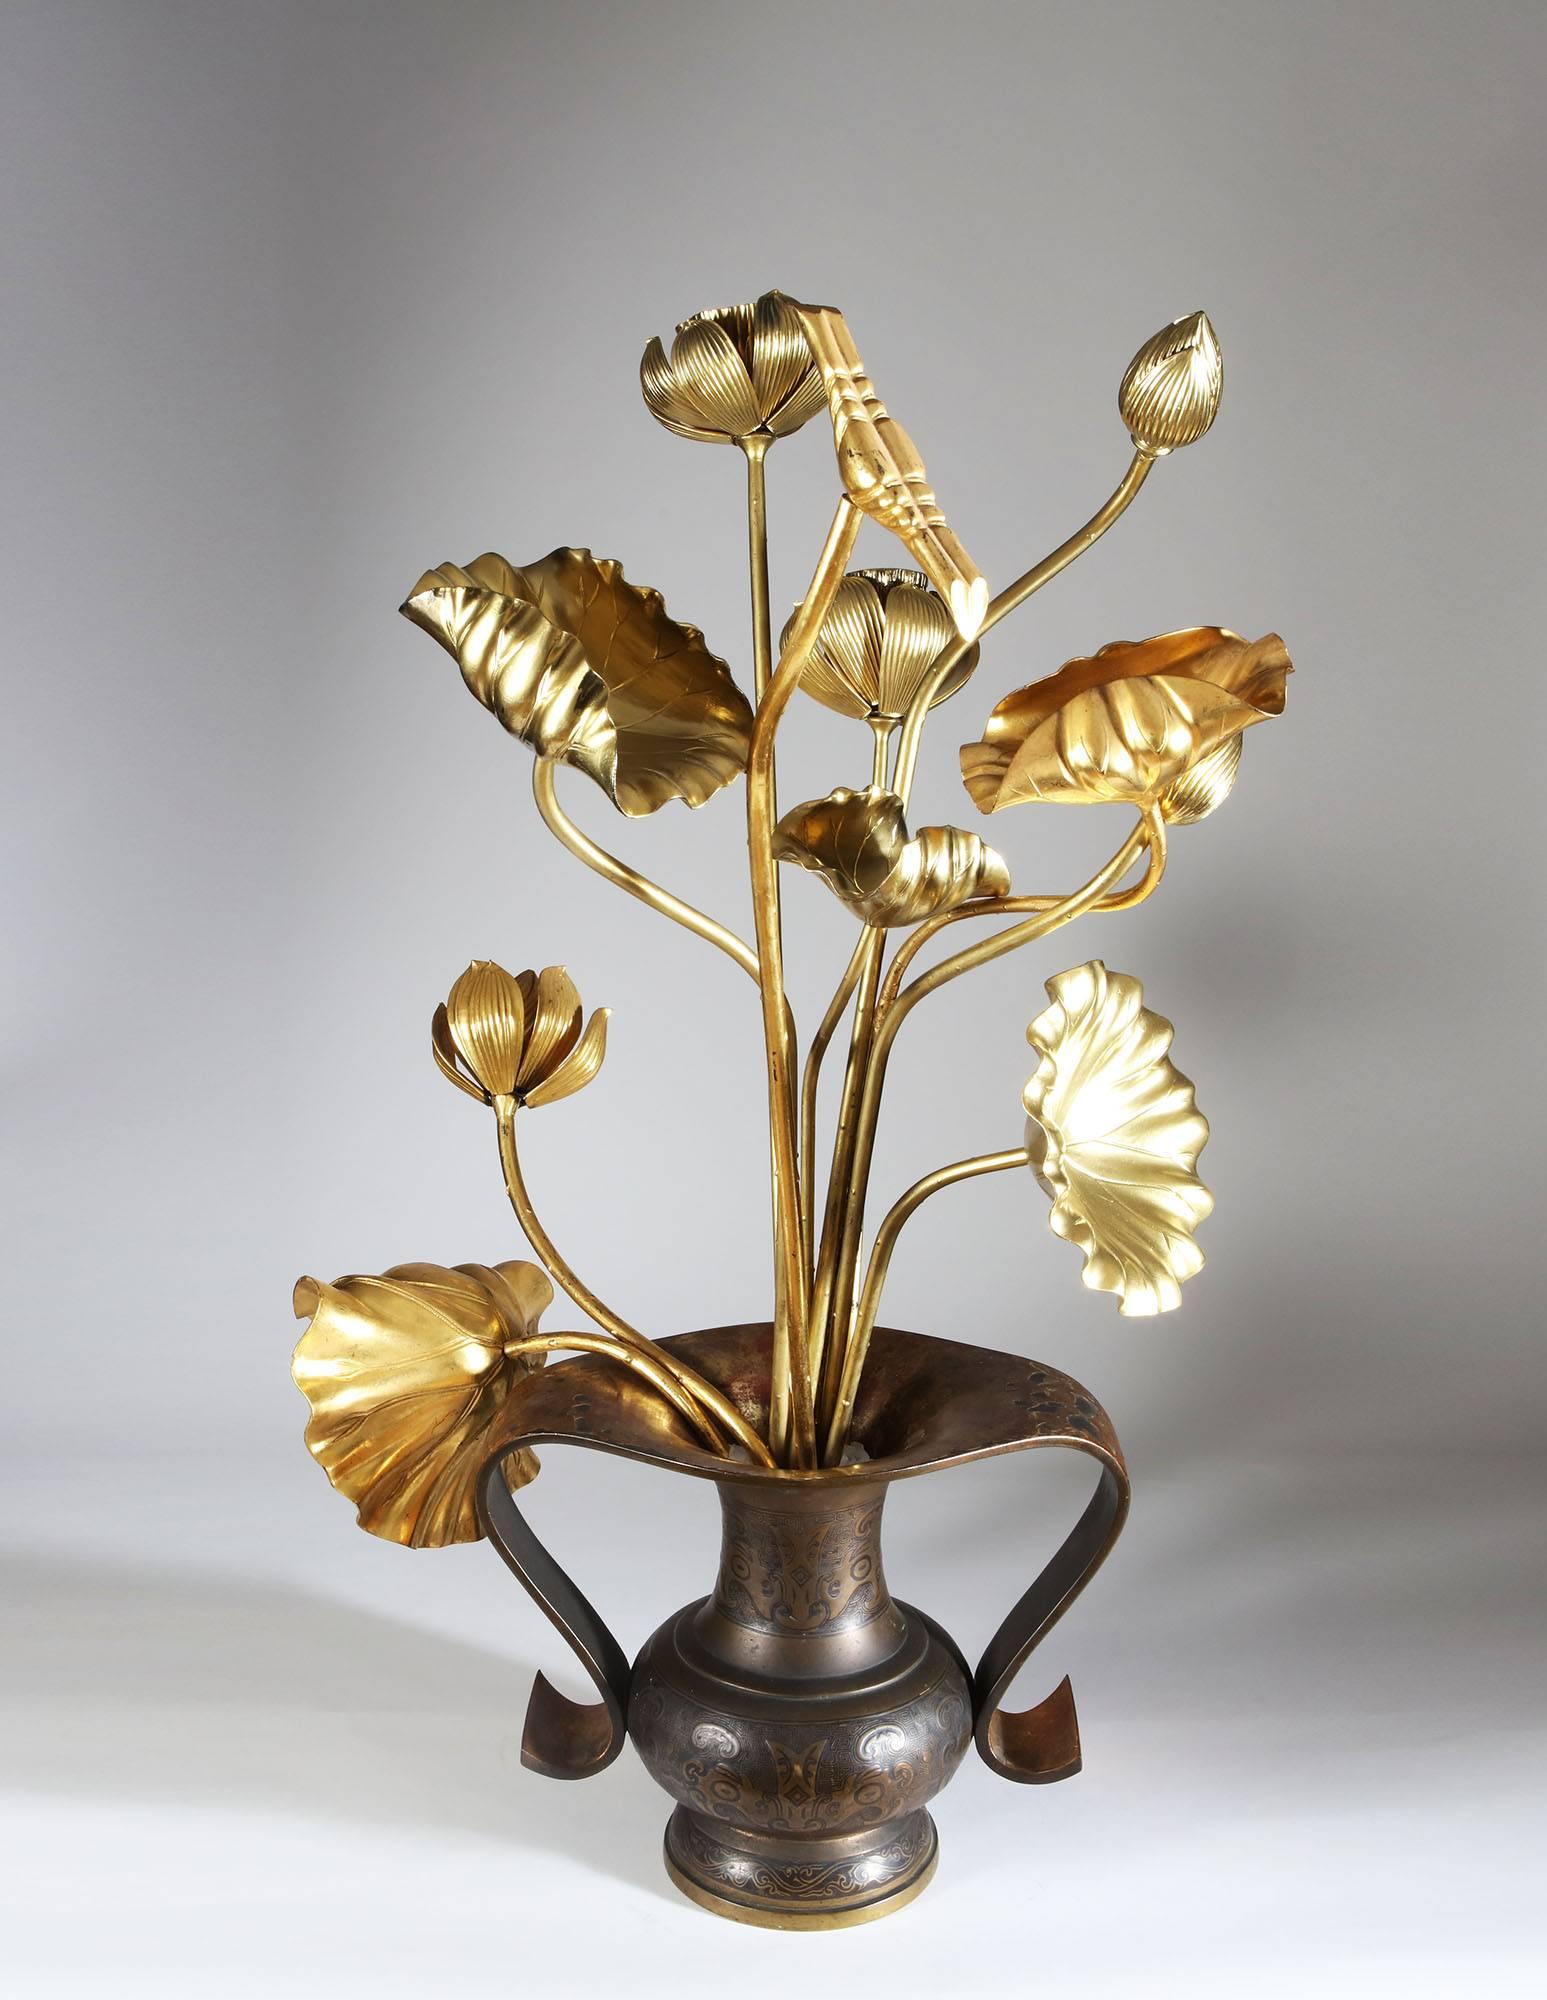 Meiji Collection of 20 Japanese Gold Lacquered Lotus Flowers